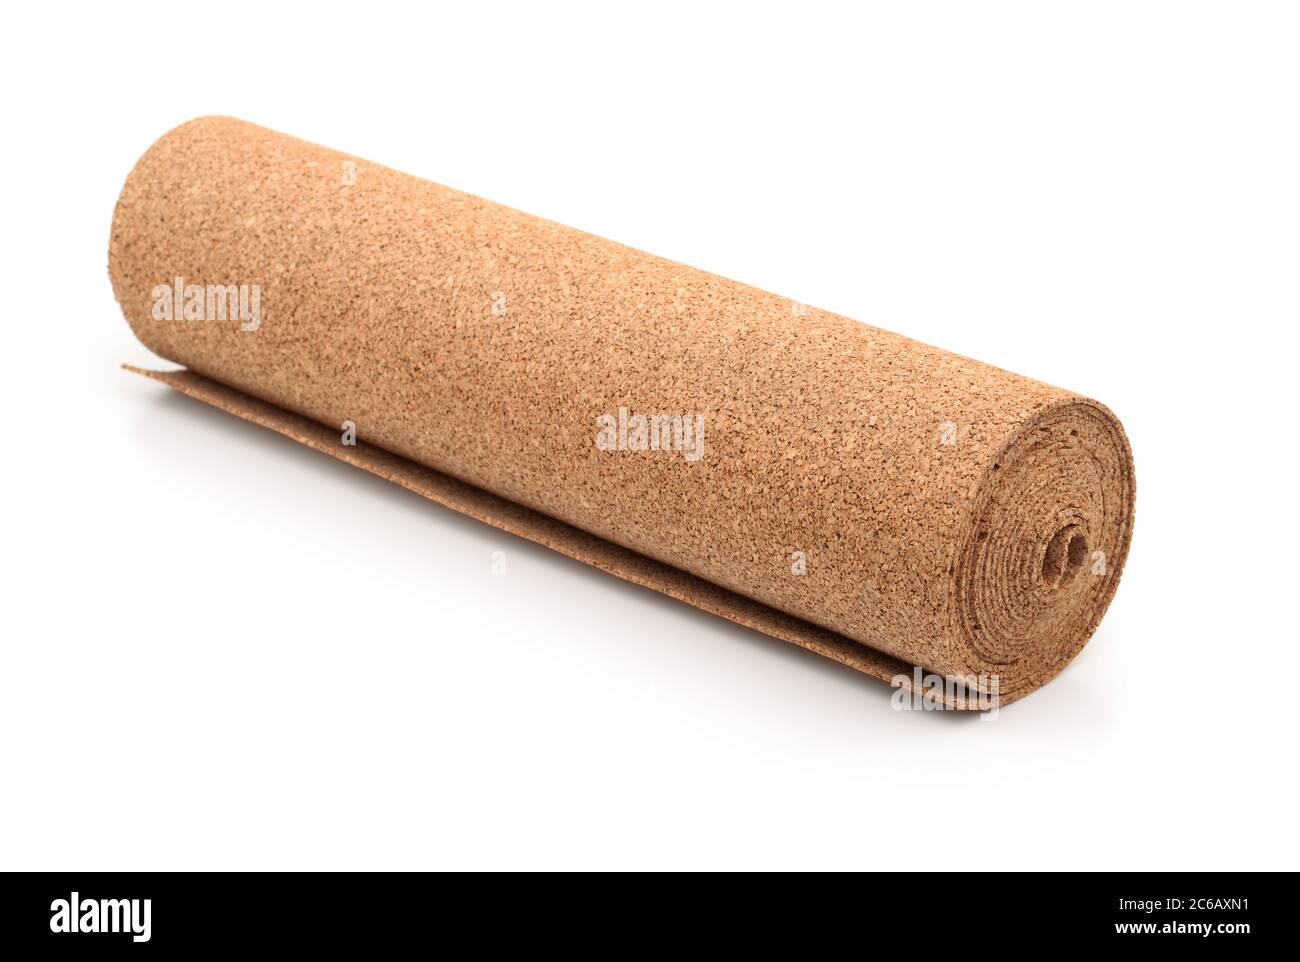 Natural cork flooring underlayment roll isolated on white Stock Photo